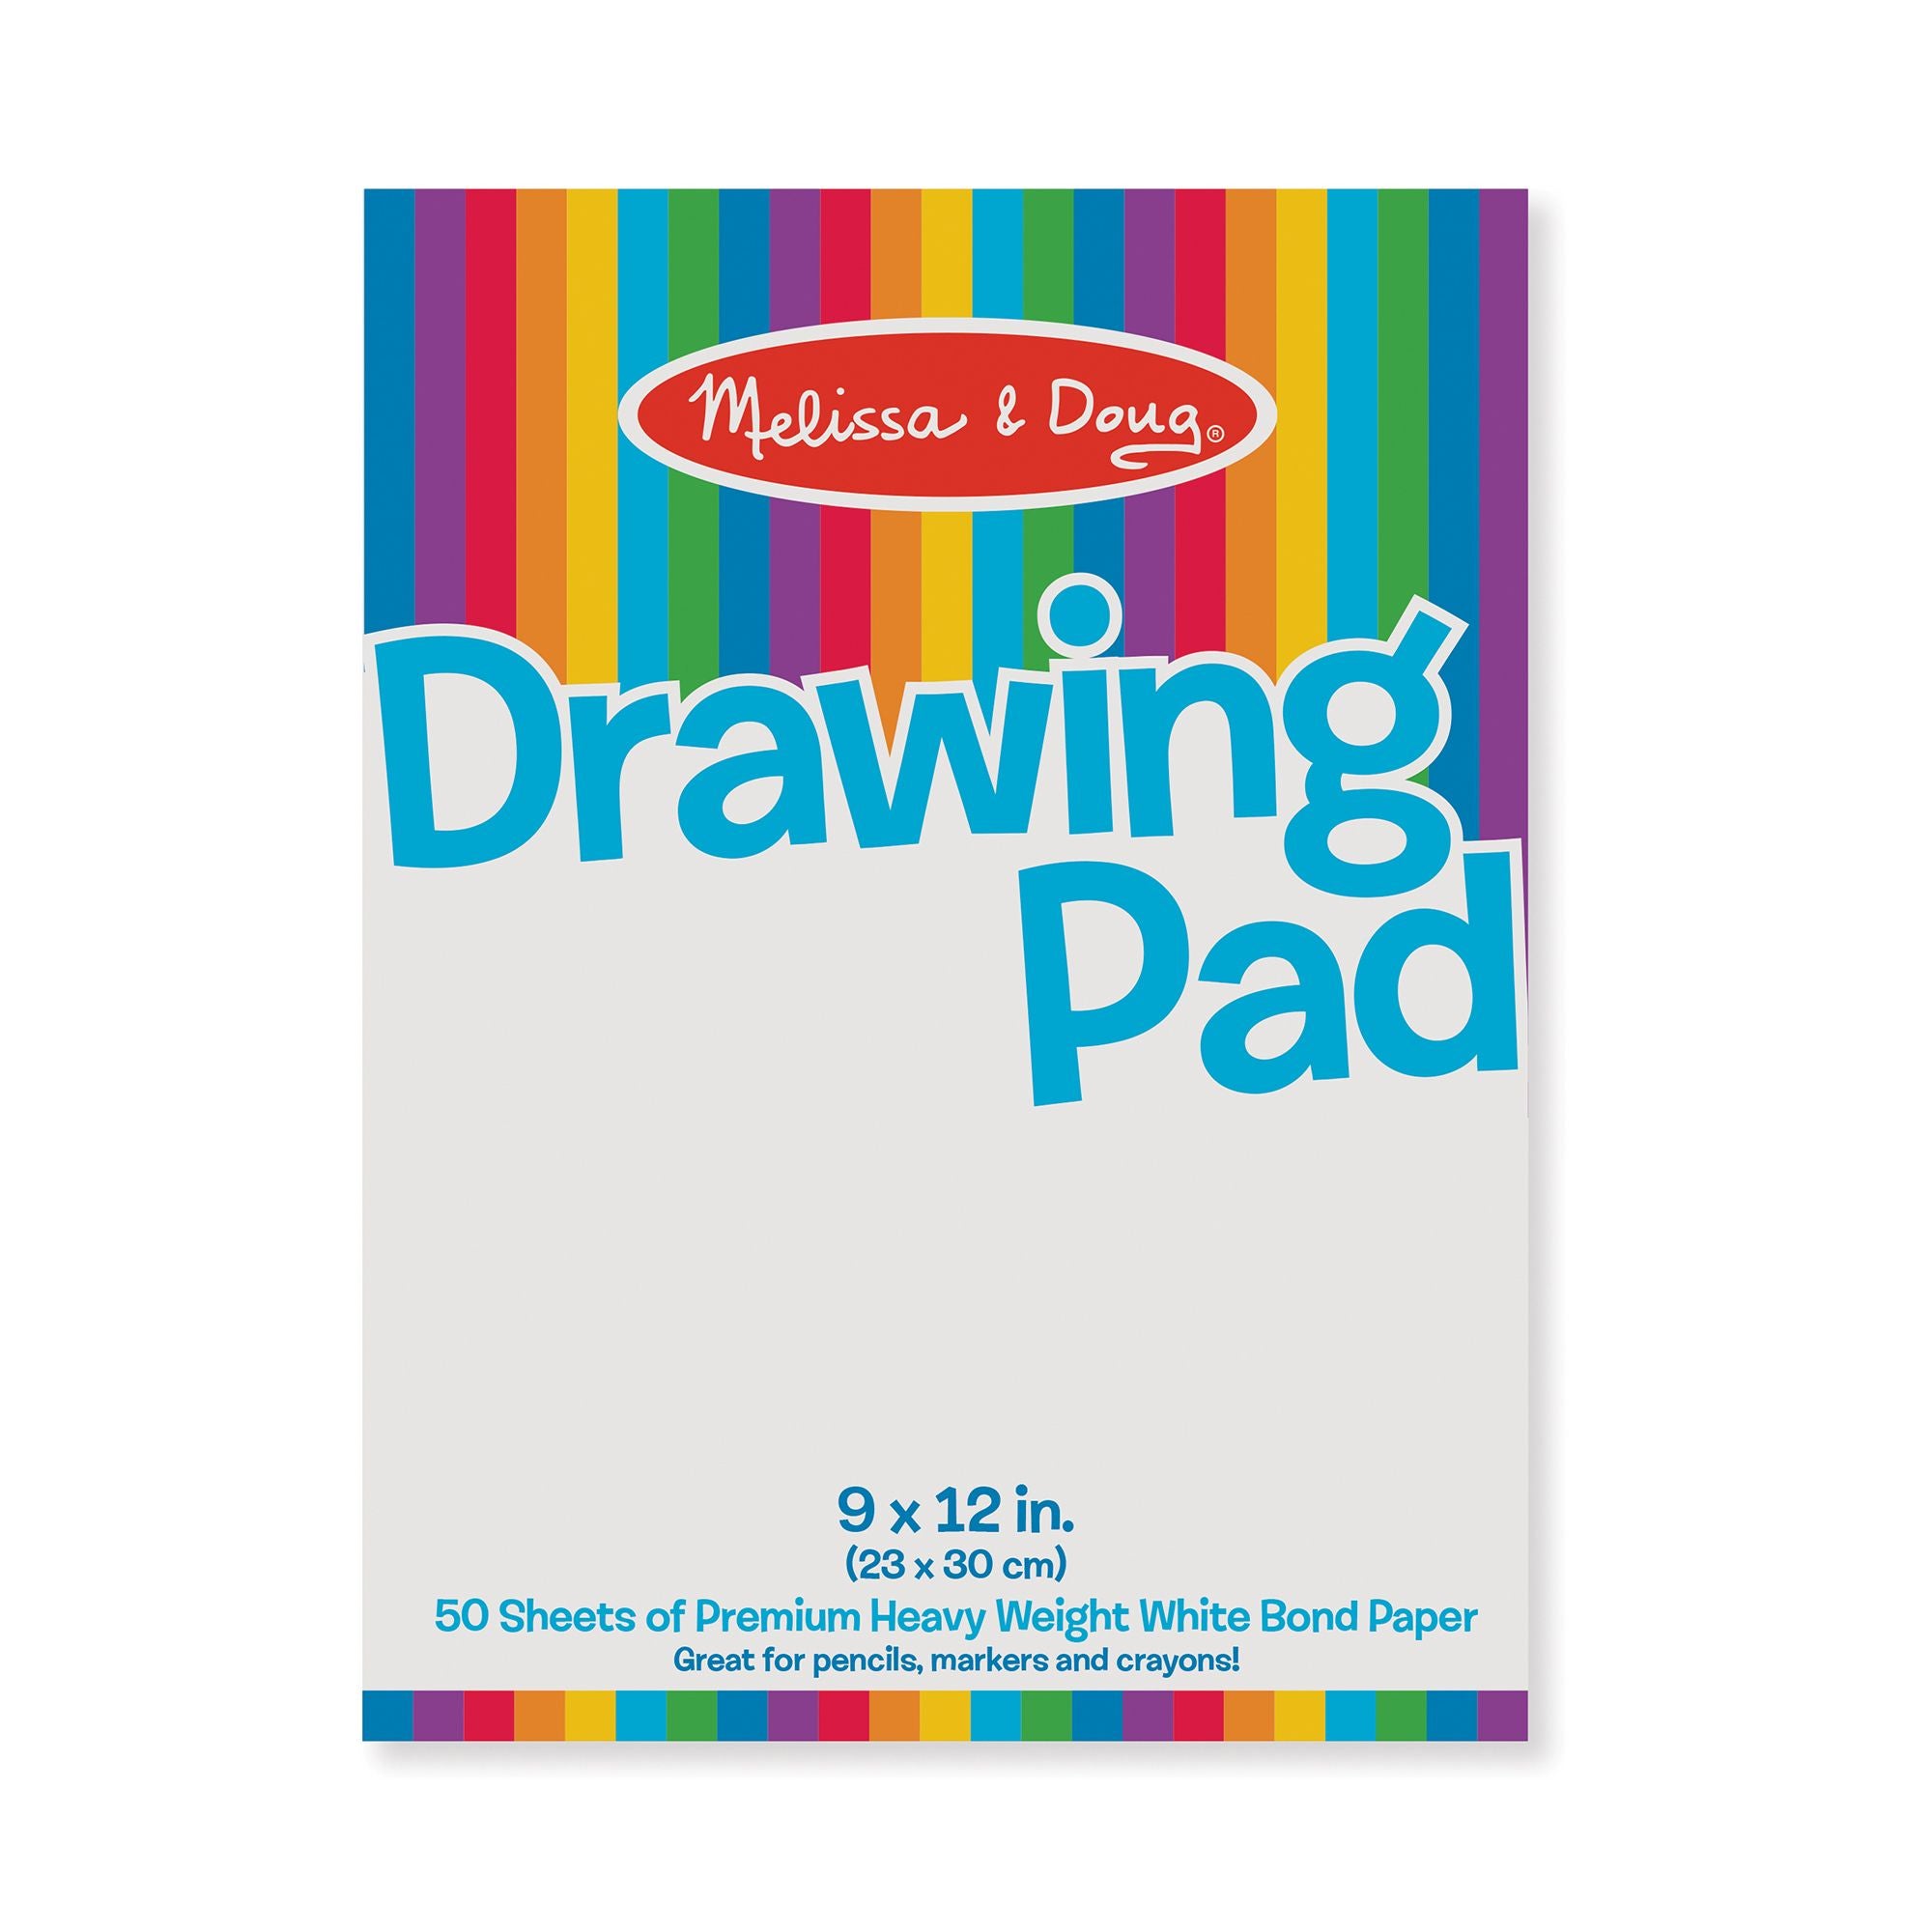  Melissa & Doug Drawing Pad (9 x 12 inches) With 50 Sheets of  White Bond Paper : Melissa & Doug: Toys & Games